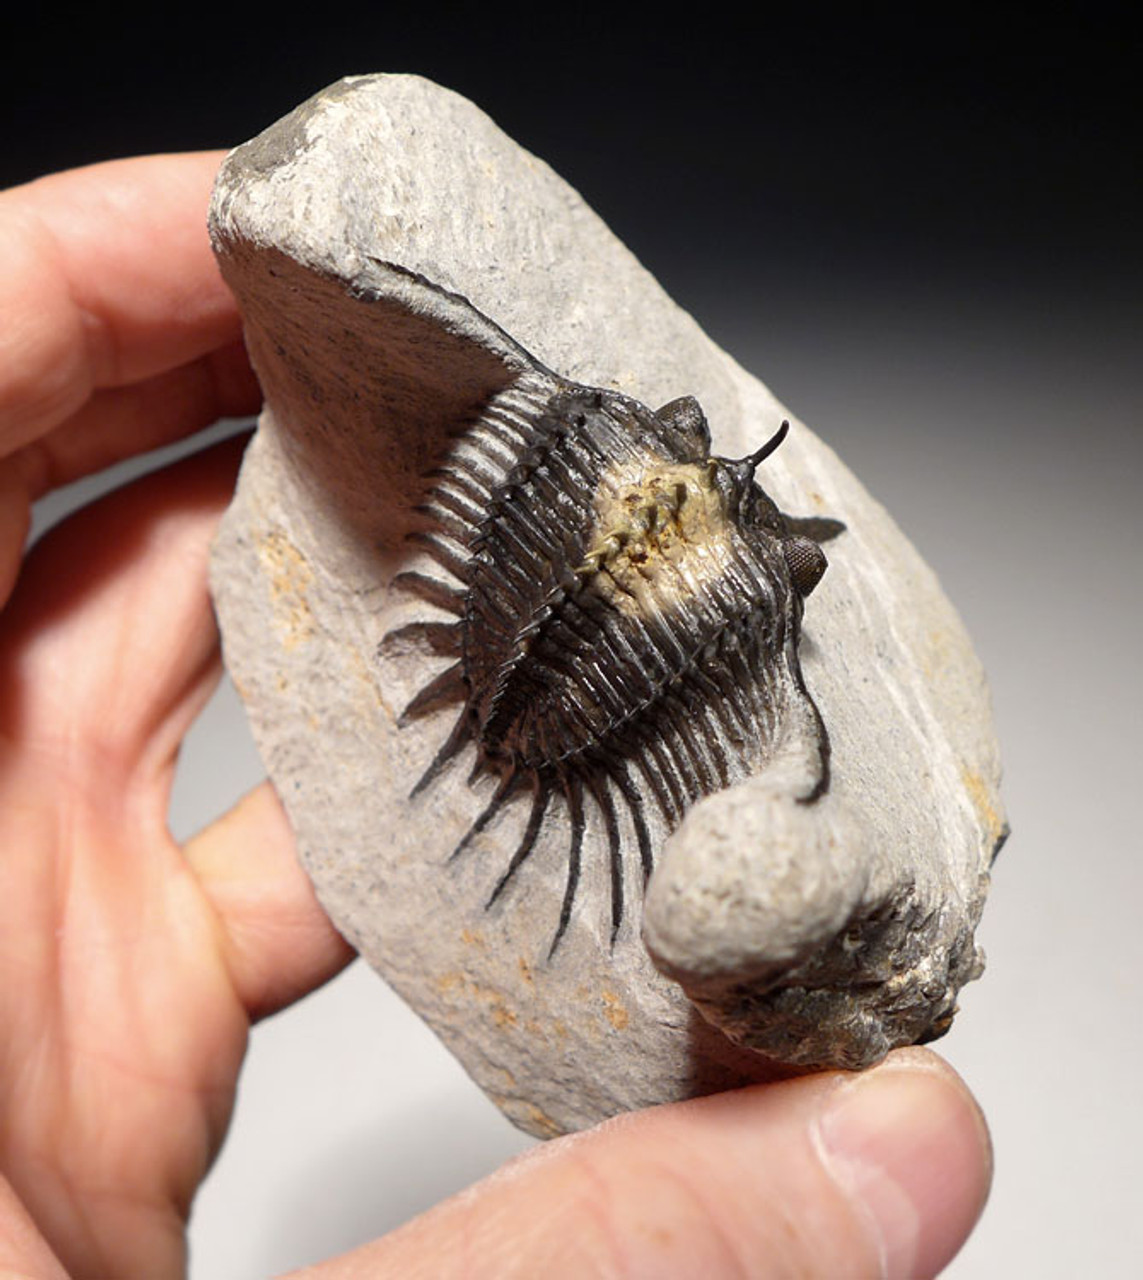 STUNNING BI-COLORED SPINY PSYCHOPYGE TRILOBITE WITH COMPLETE FREE-STANDING SPINES *TRX444